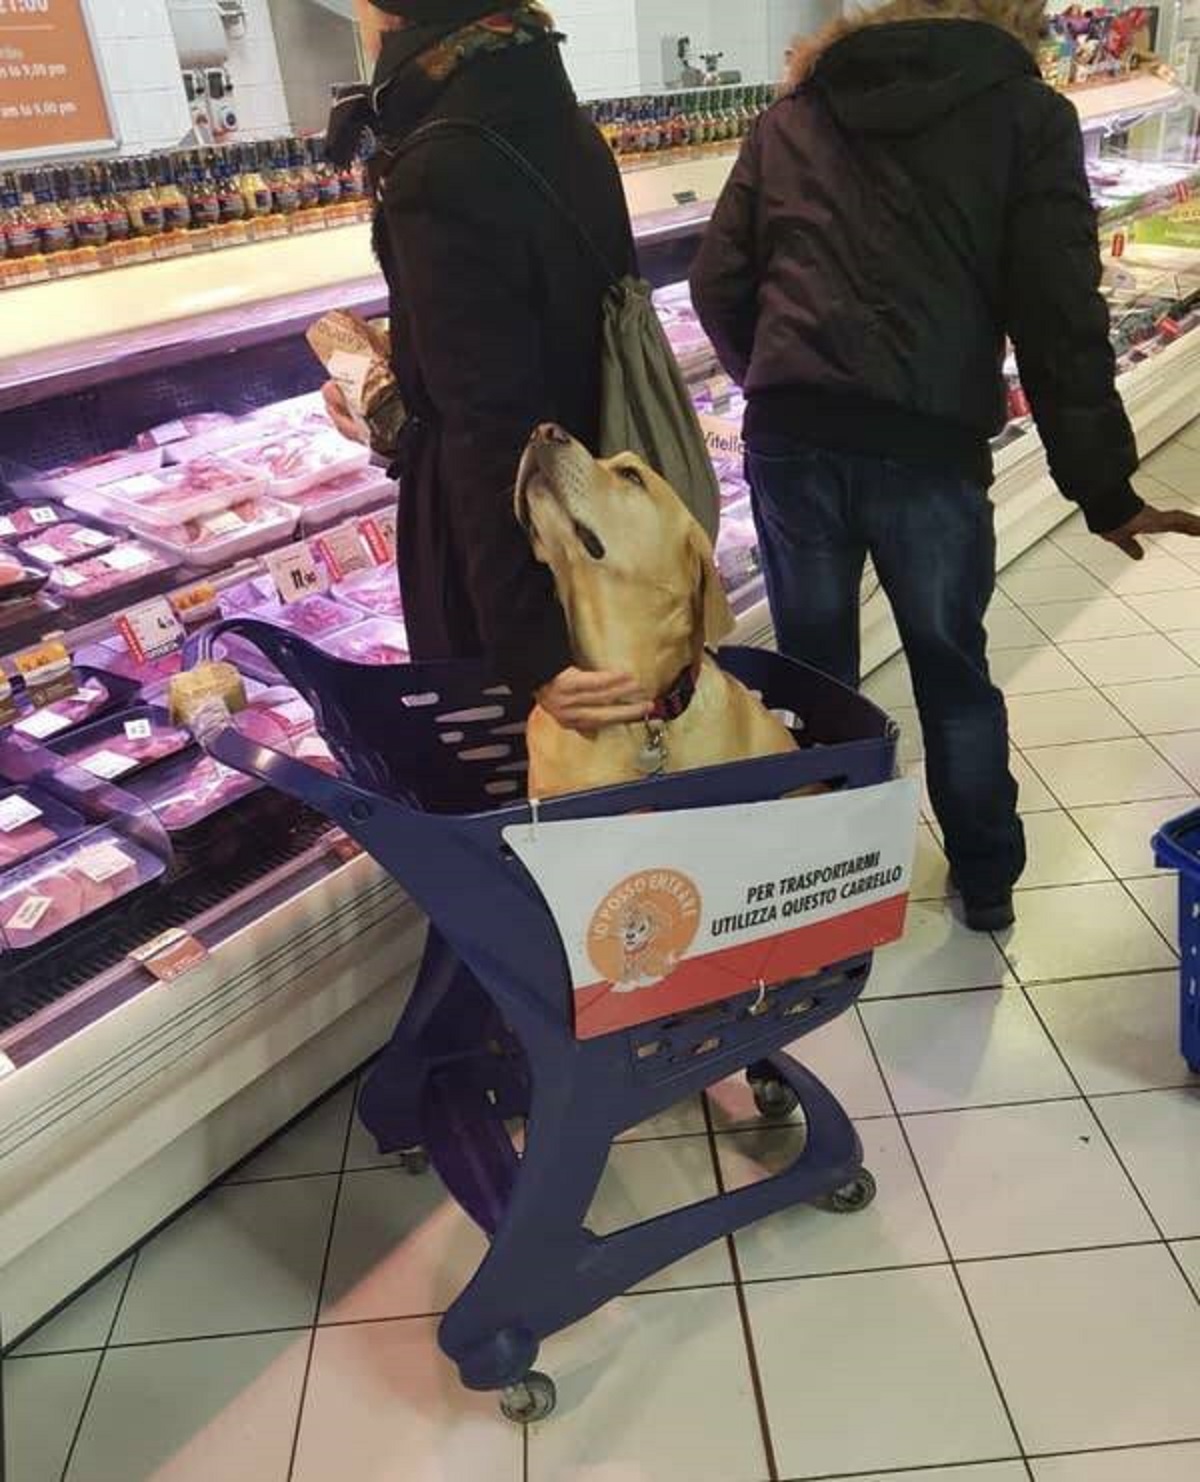 Italy has pet carts at grocery stores, so you don't have to leave your dog outside while you shop.